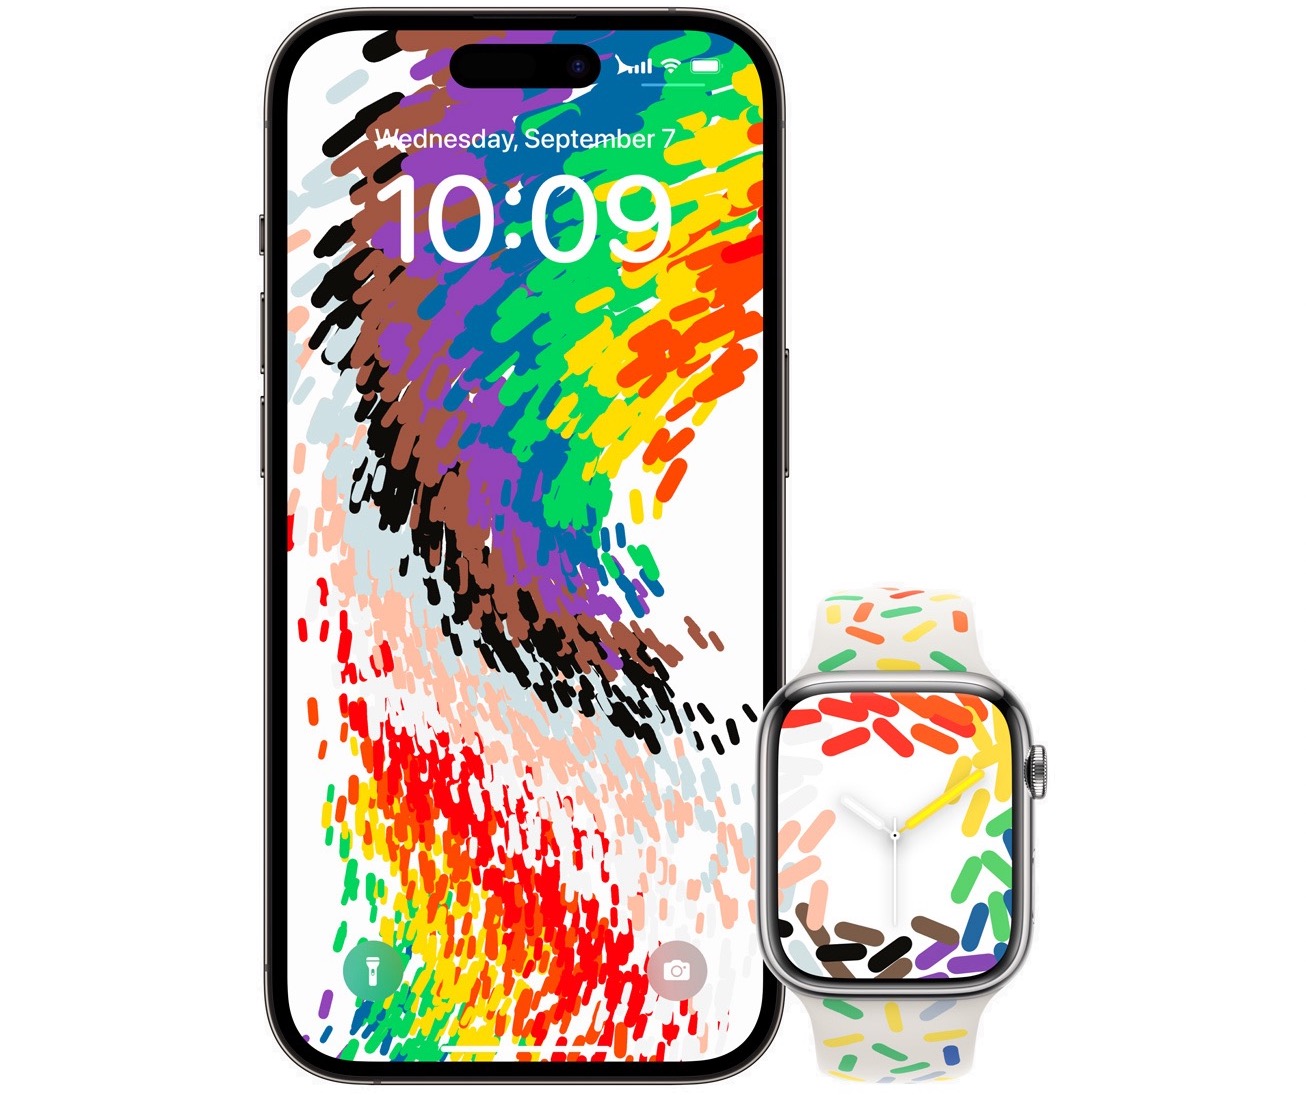 Pride Celebration wallpaper and watch face and Pride Edition Sport Band